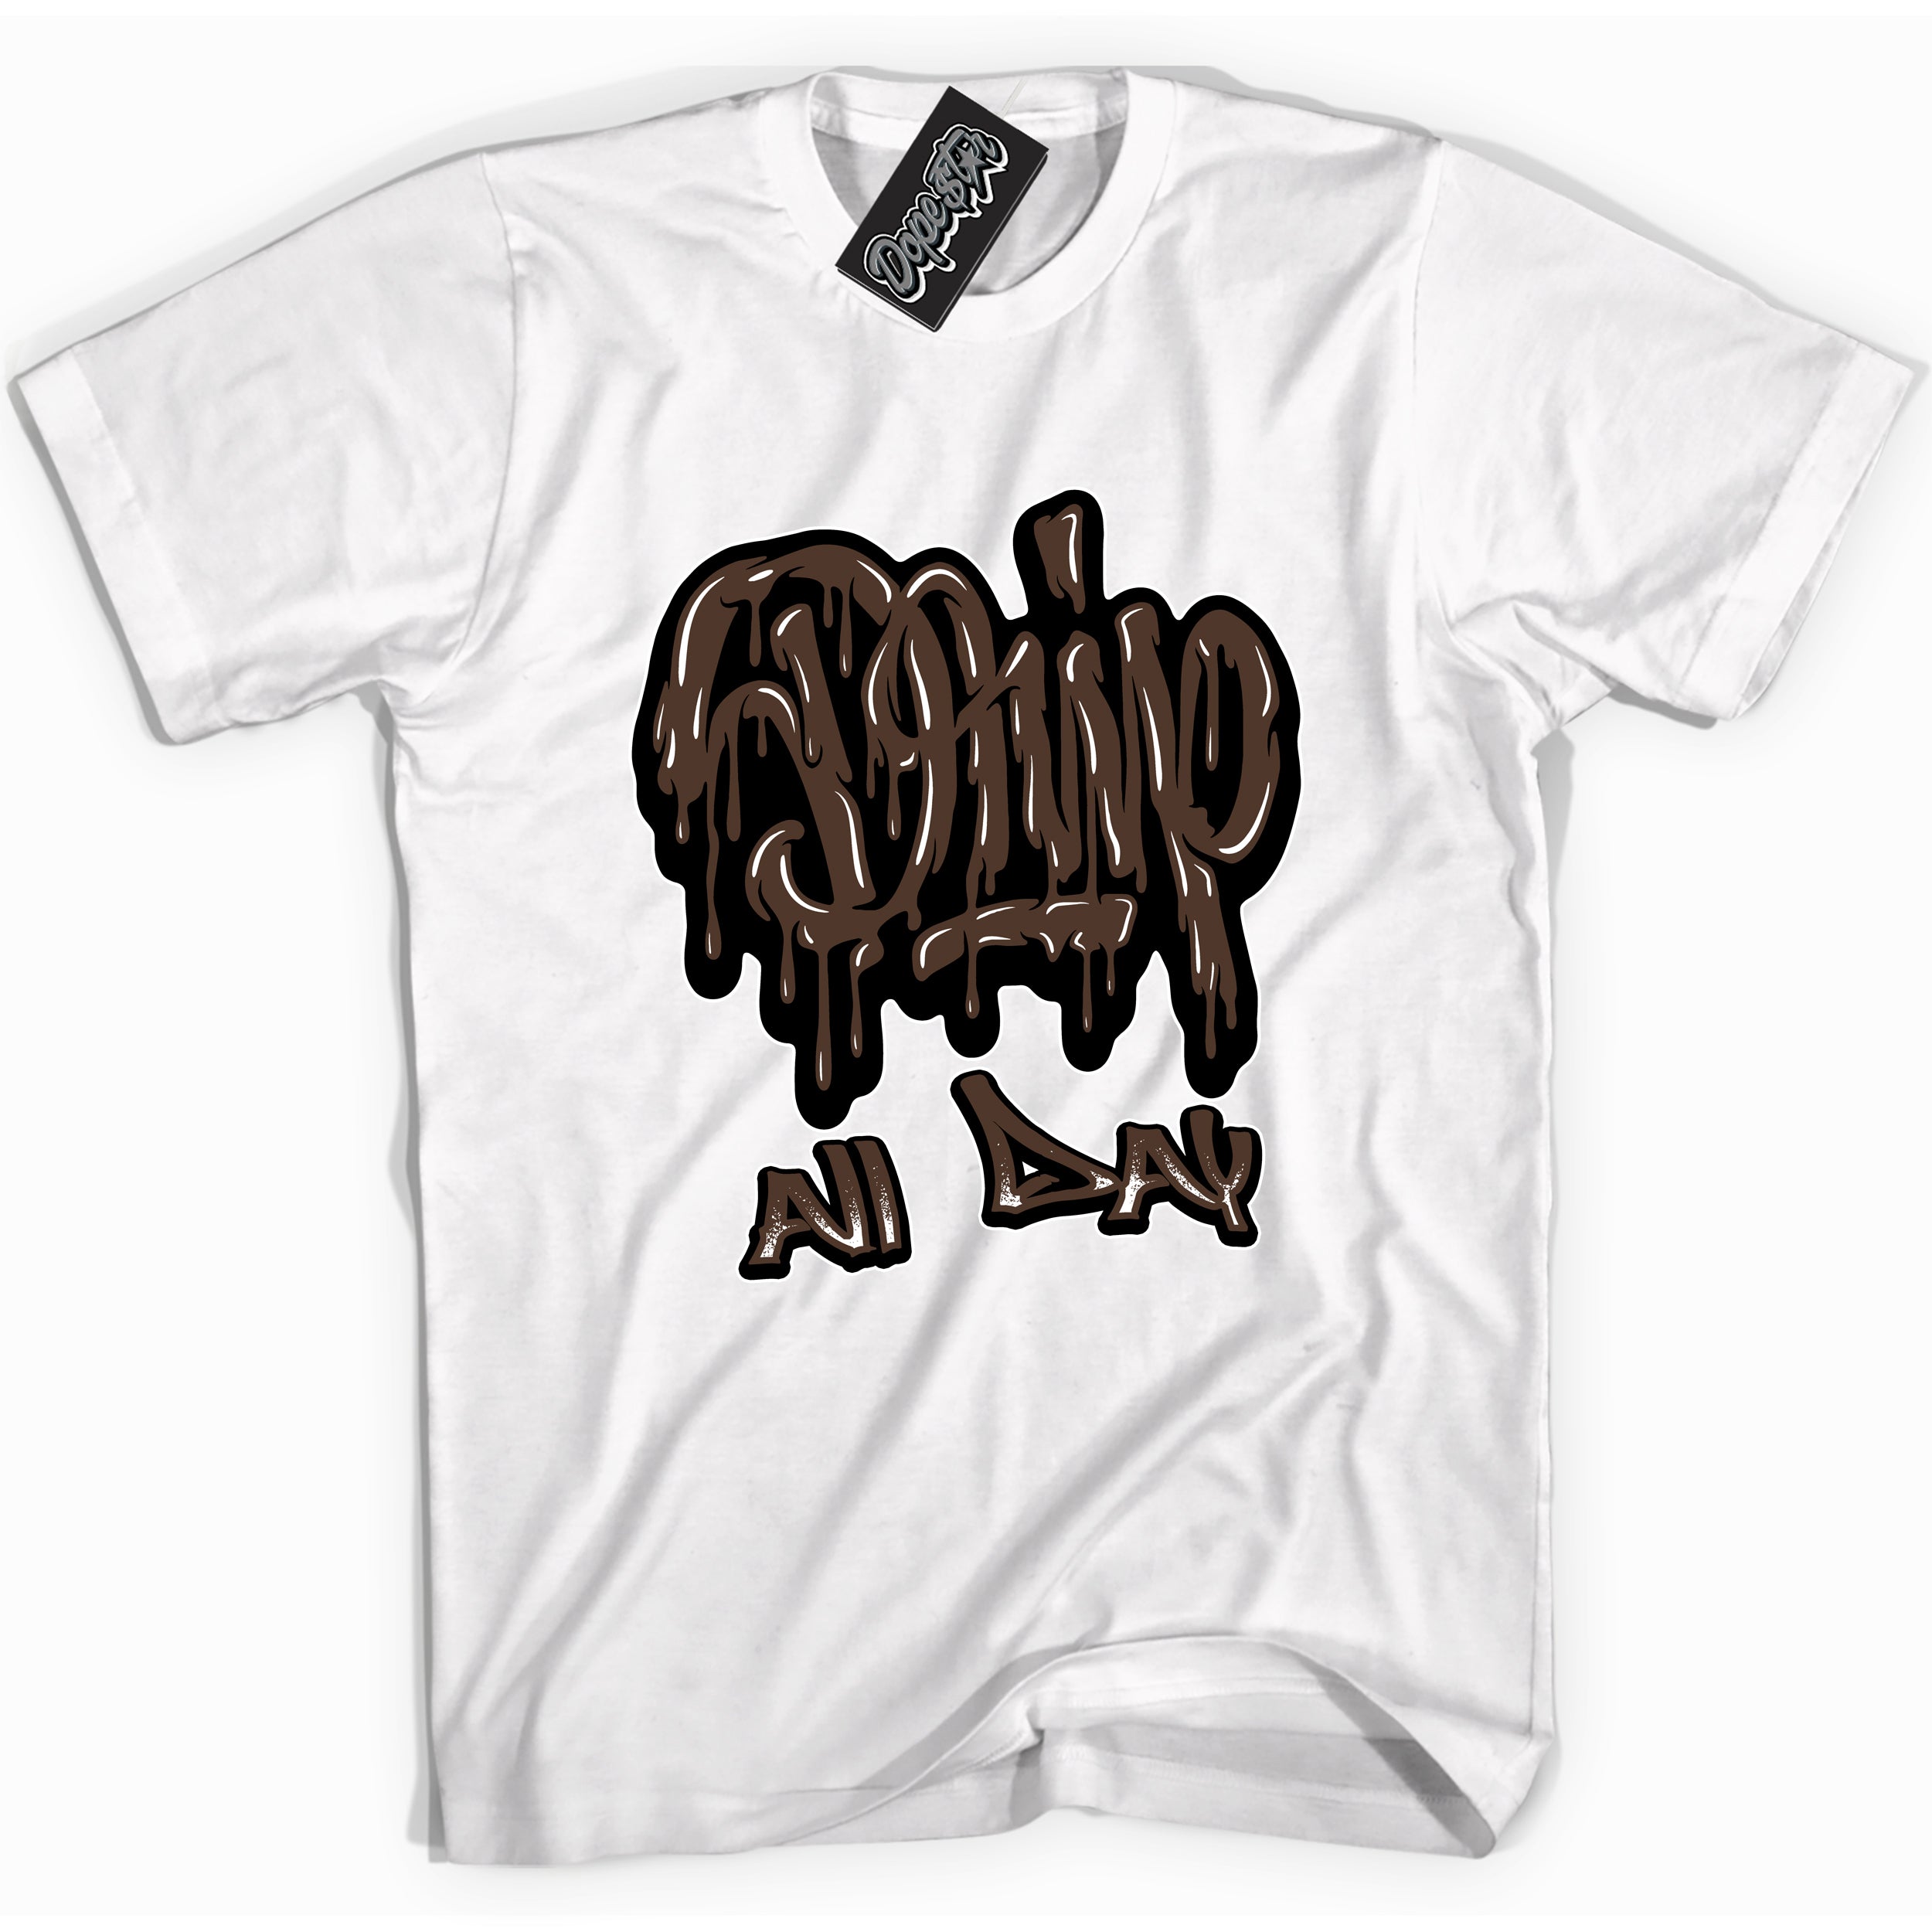 Cool White graphic tee with “ Drip All Day ” design, that perfectly matches Palomino 1s sneakers 